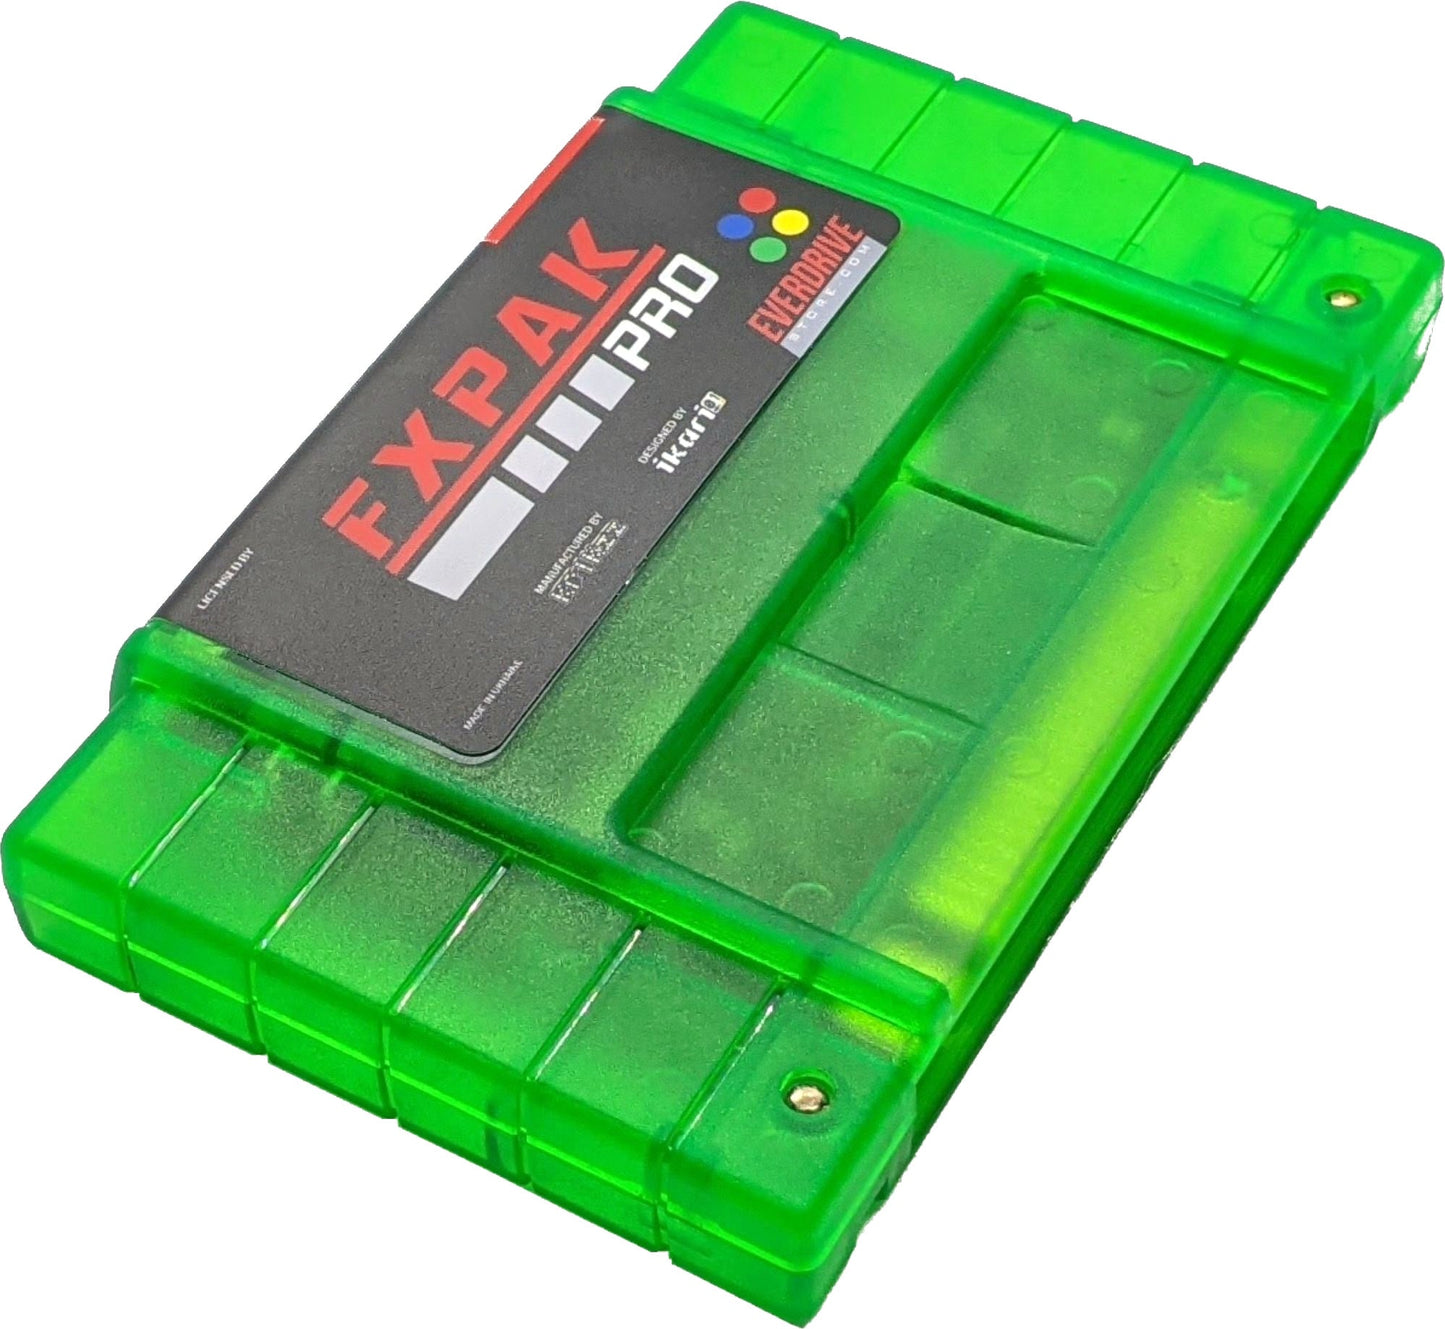 FXPAK PRO NAS - Frosted Green